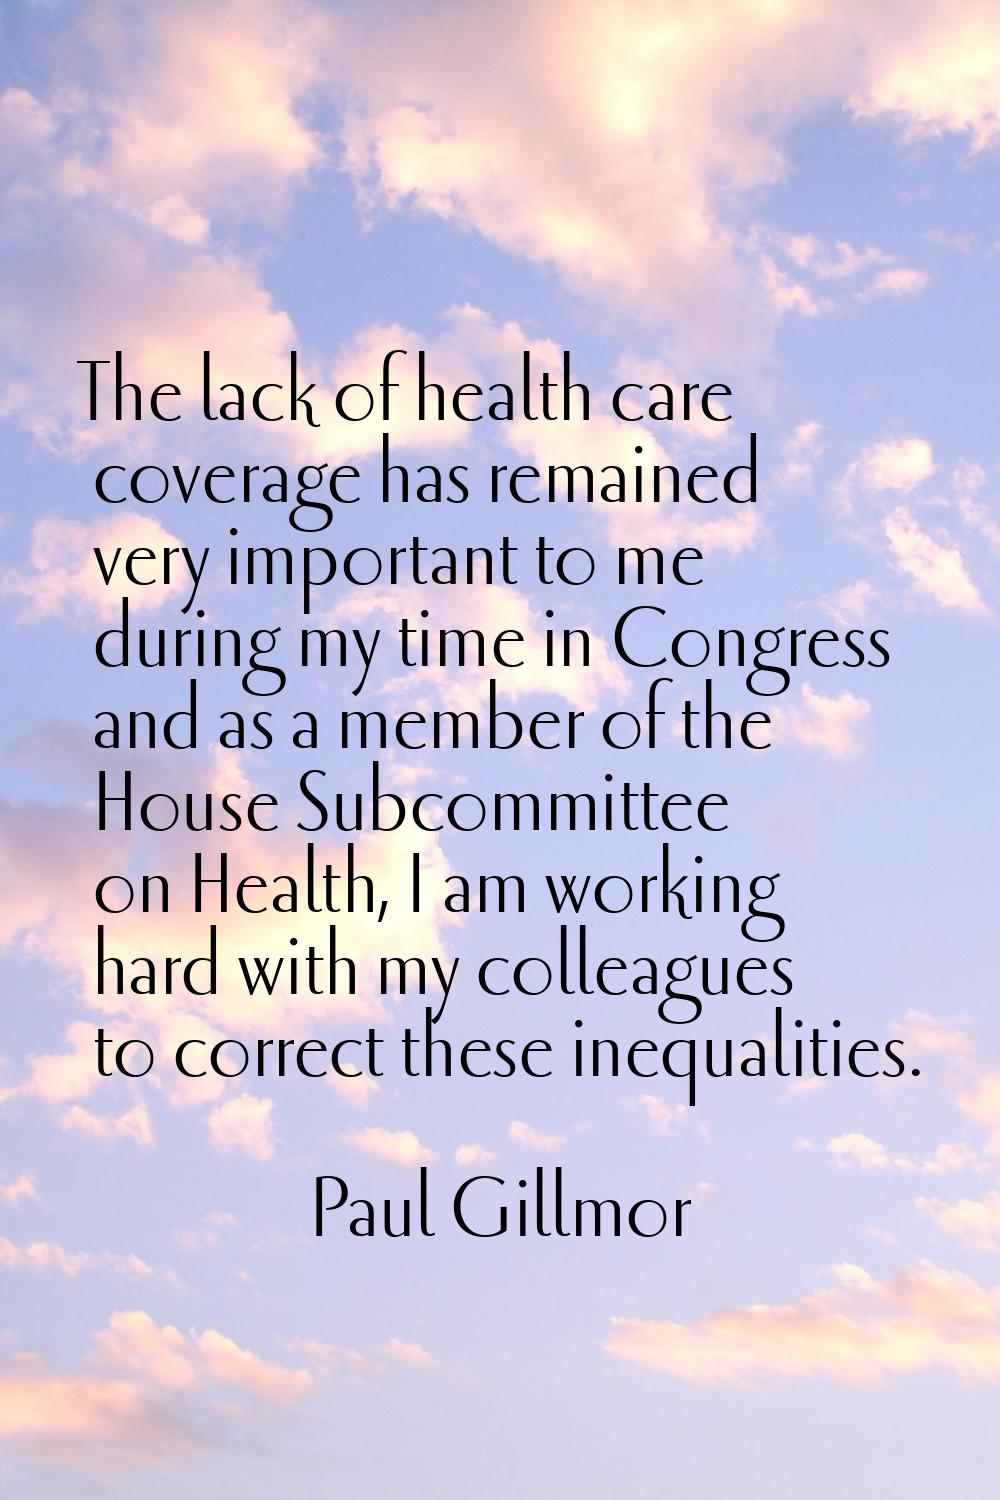 The lack of health care coverage has remained very important to me during my time in Congress and a